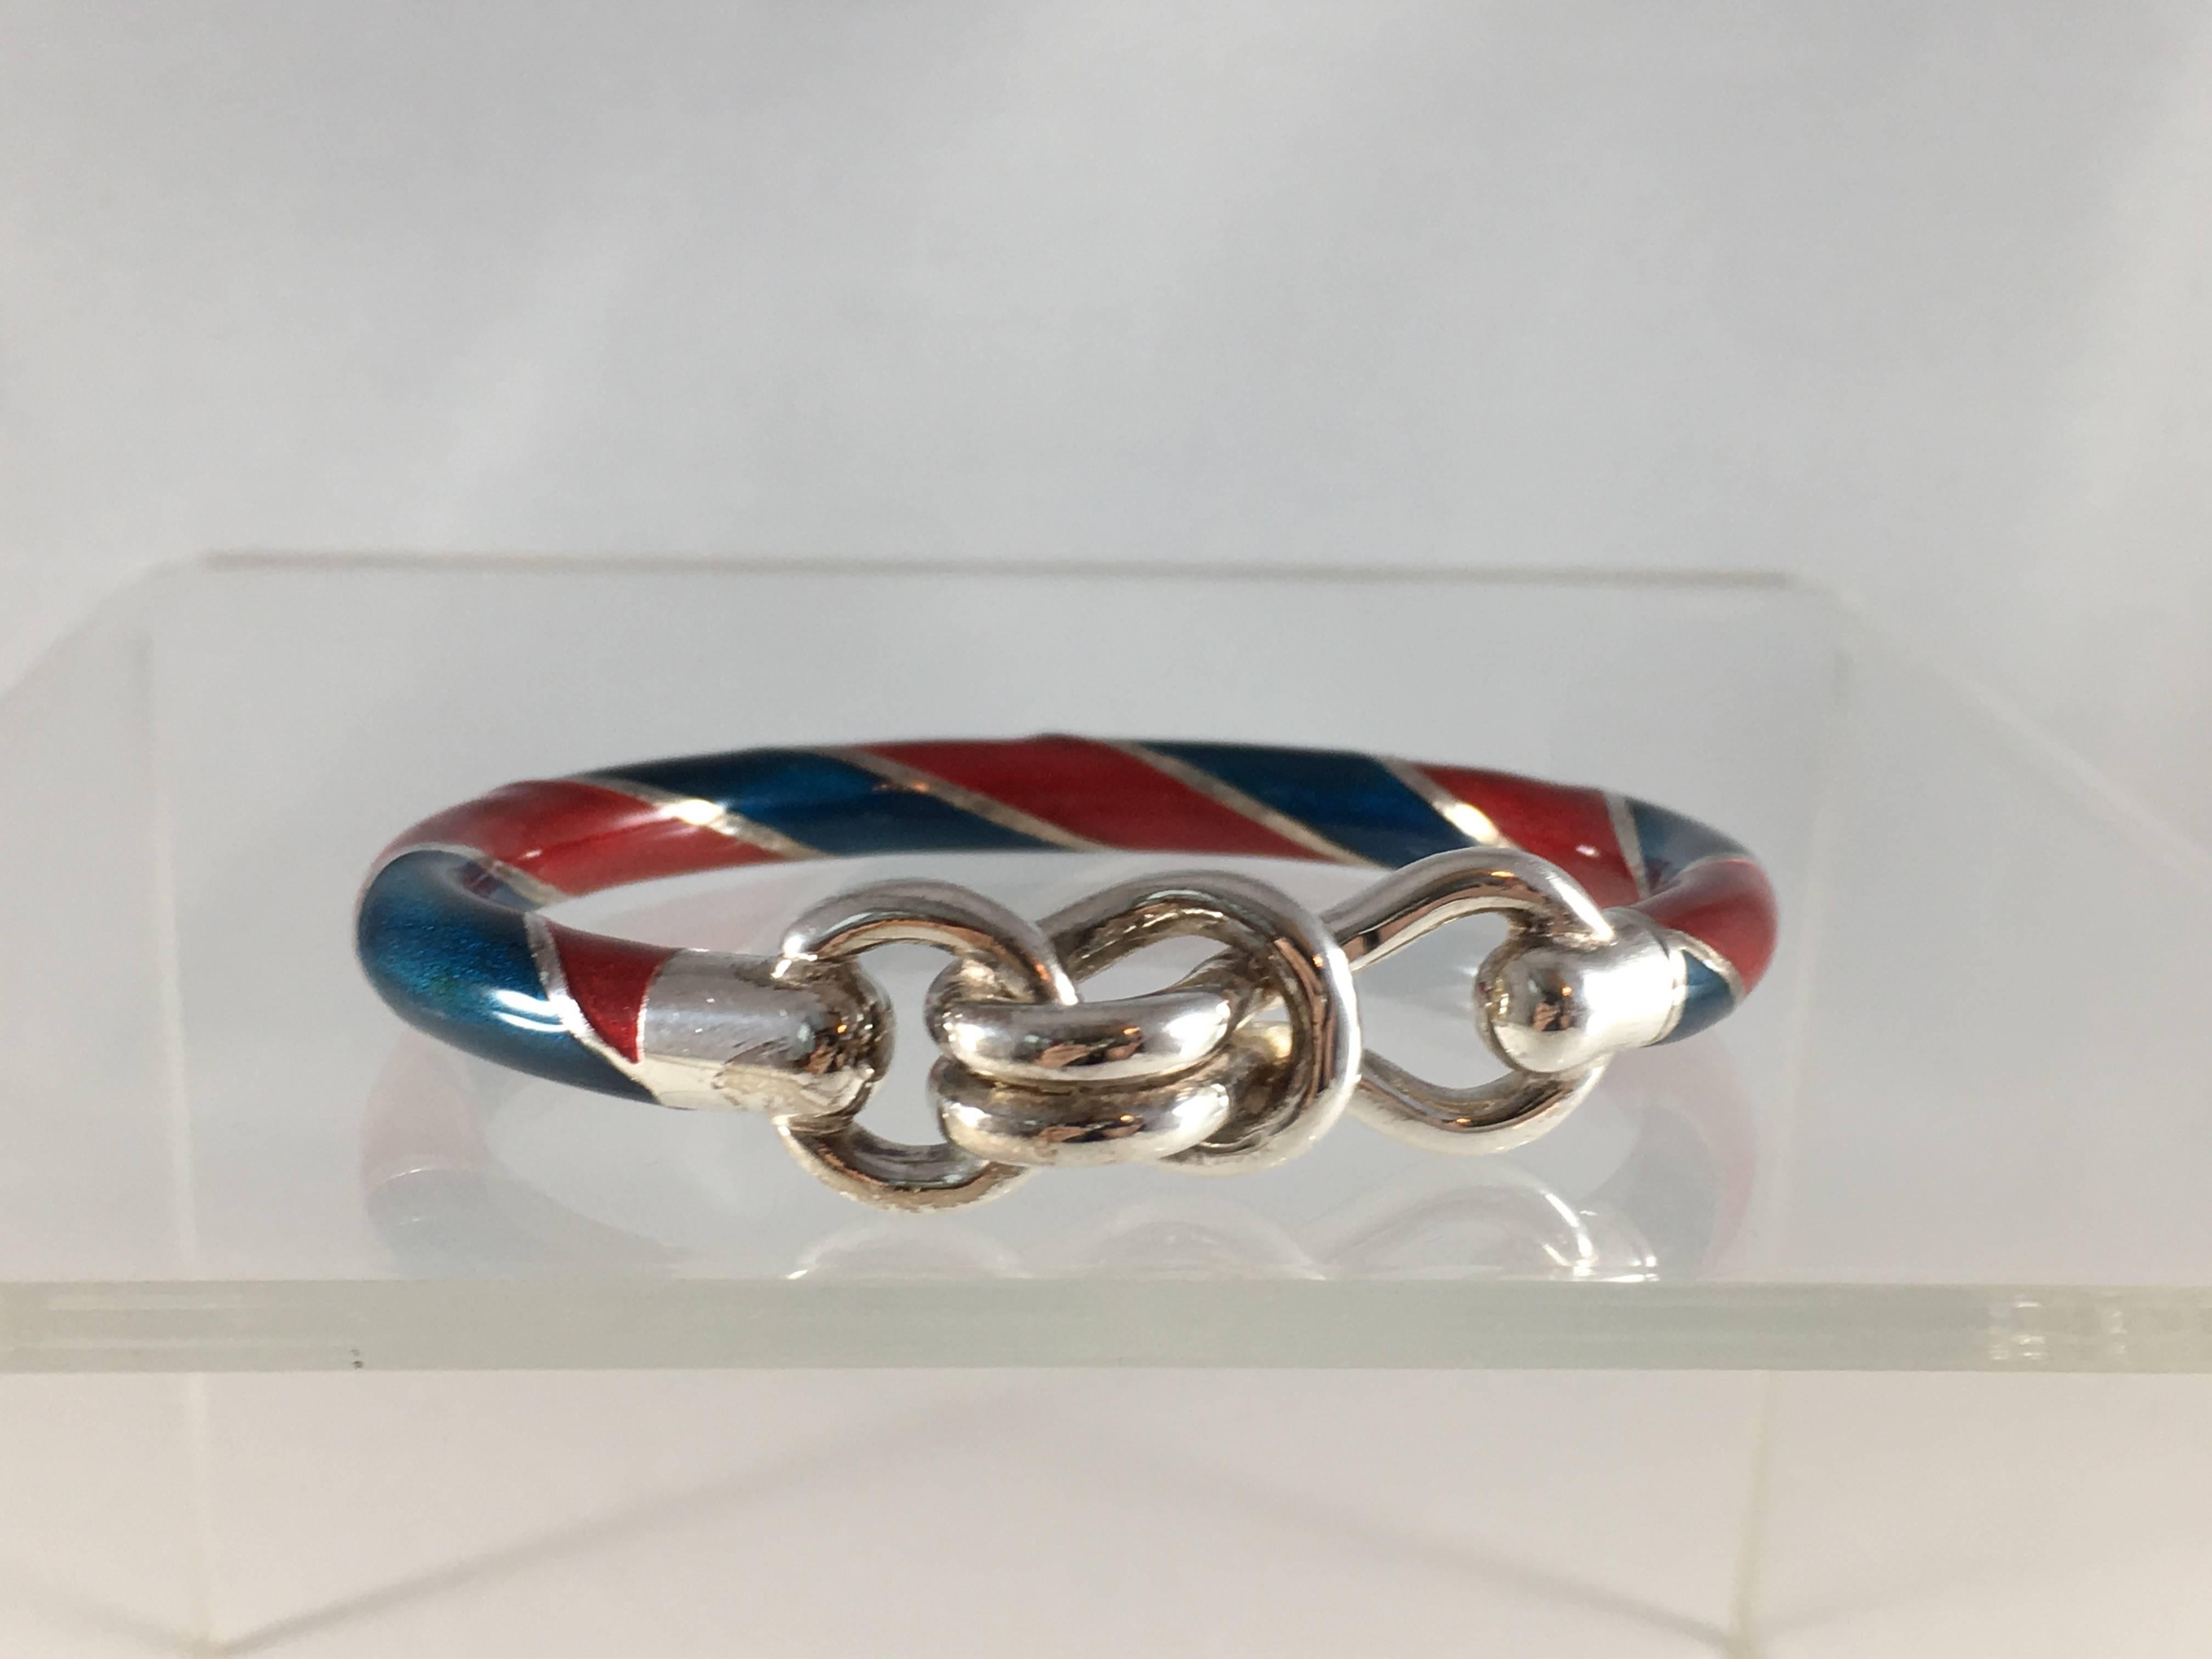 This is an amazing 1980s vintage sterling silver Gucci bracelet with red and blue enamel. It has a knot-like closure at the font that opens and allows the wearer to put it on. The inner circumference measures 6 3/8 inches. The width of the bracelet